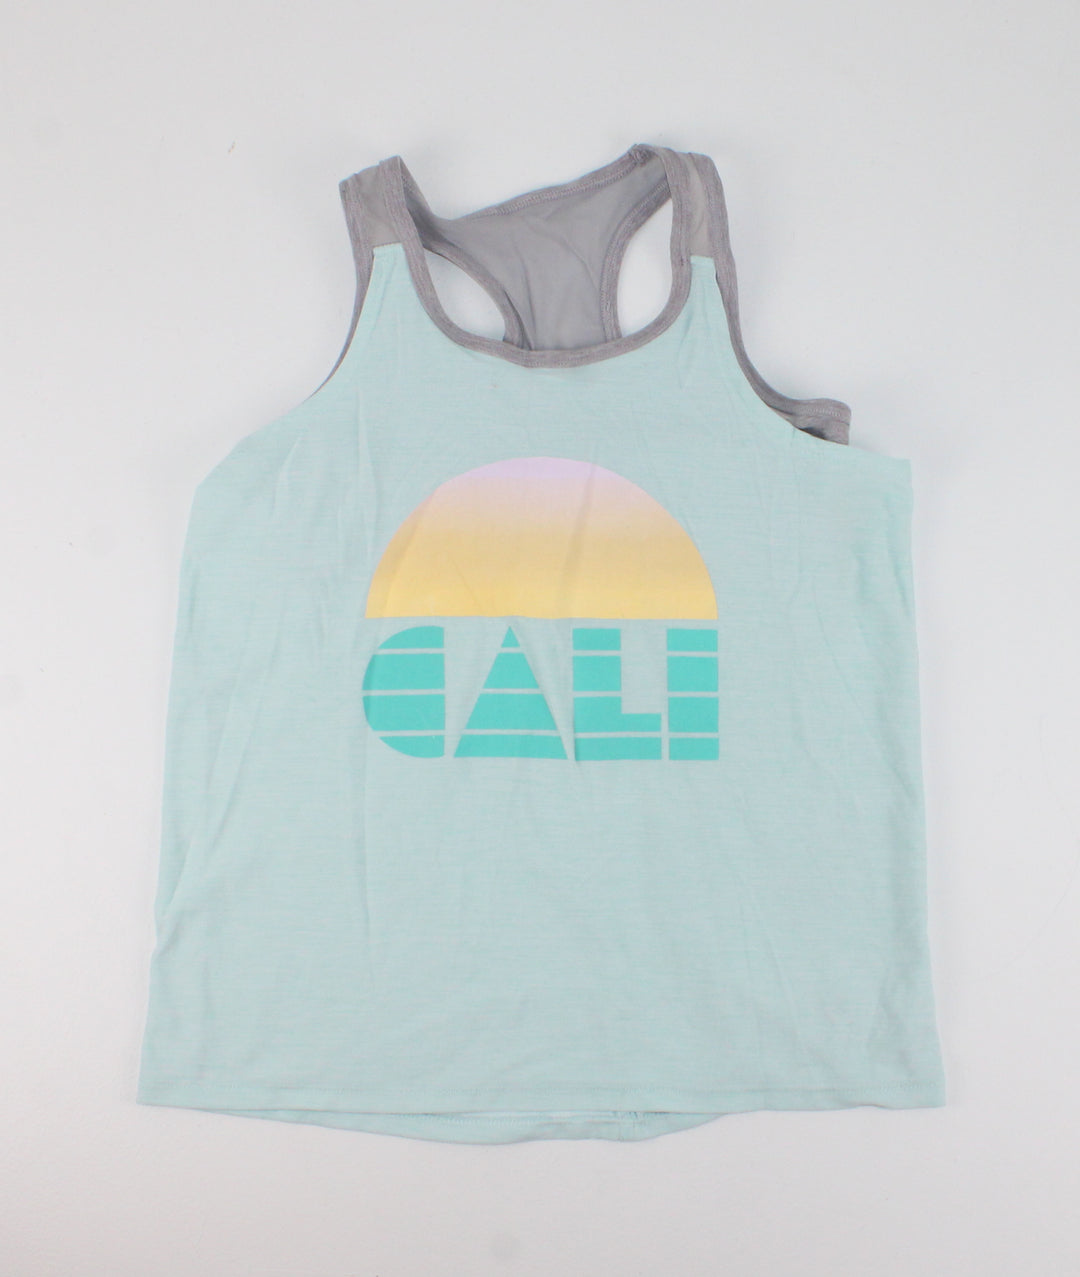 OLD NAVY ATHLETIC TOP "CALI" WITH BUILT IN BRA 10/12Y VGUC